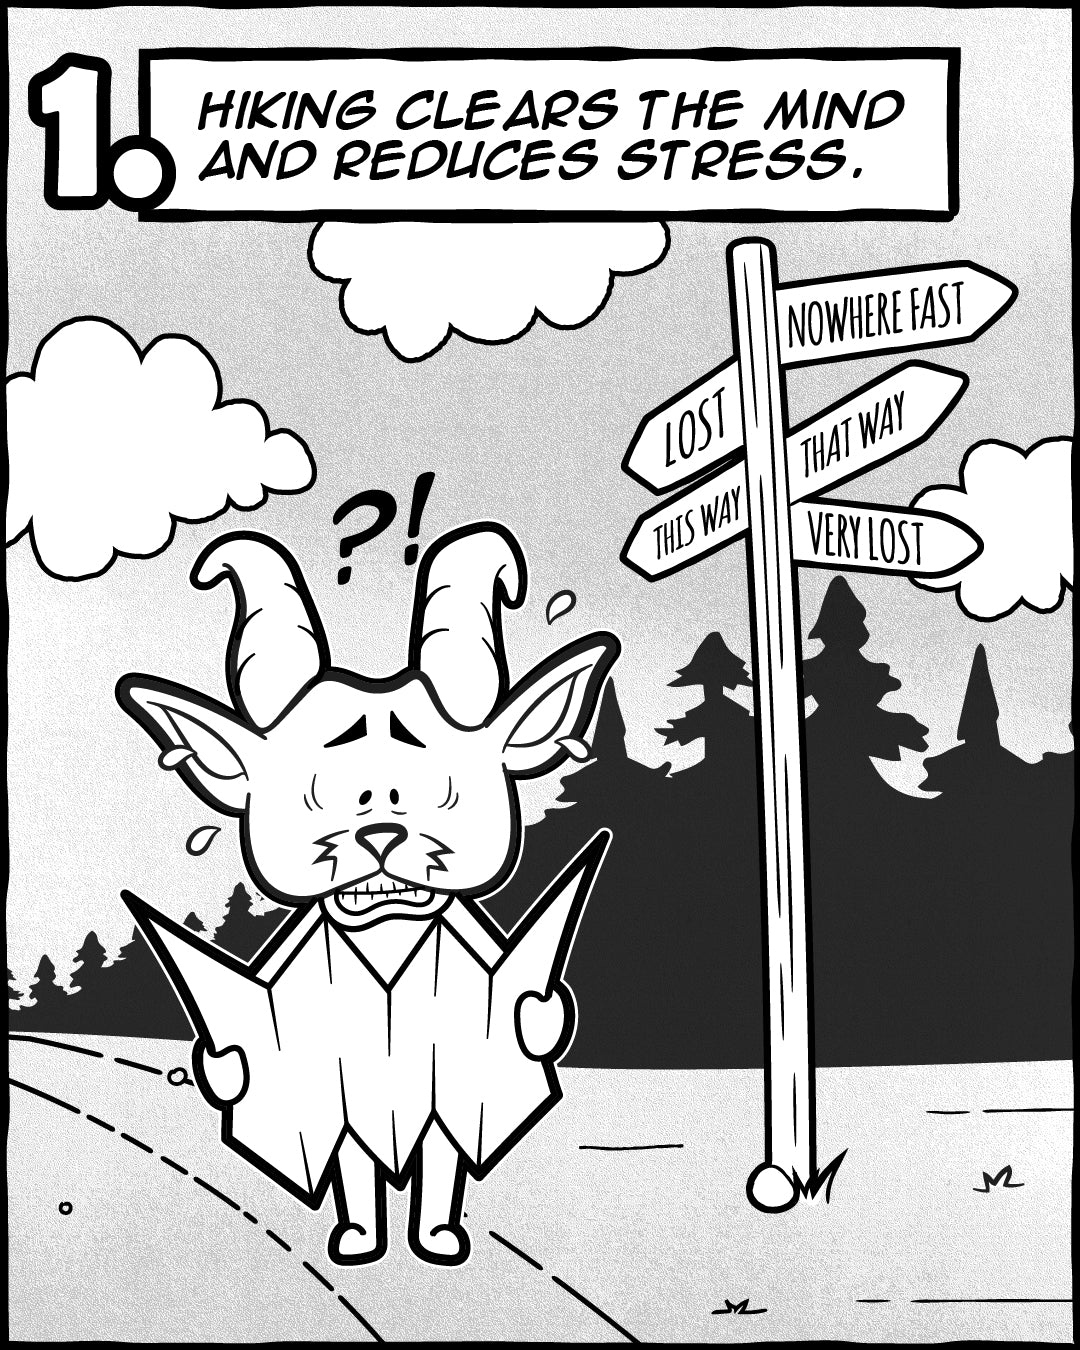 Hiking Reduces Stress - 5 Reasons Hiking Is Good For Your Soul, The Adventures Of Lambert Comic Series | TRVRS Outdoors